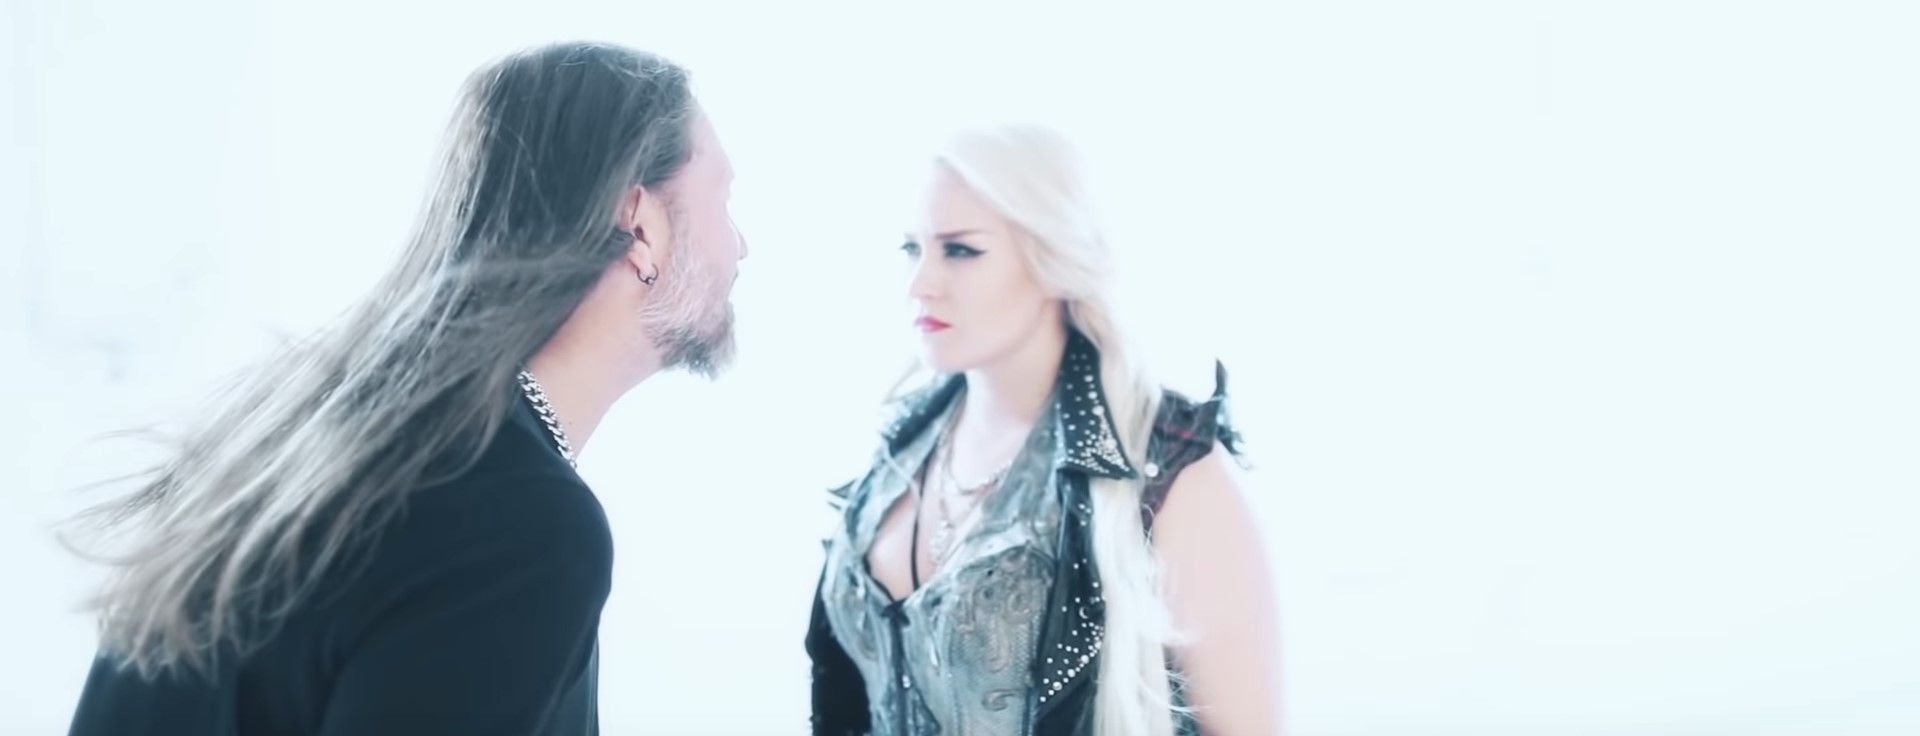 Hammerfall ft. Noora Louhimo - Second To One (Official)